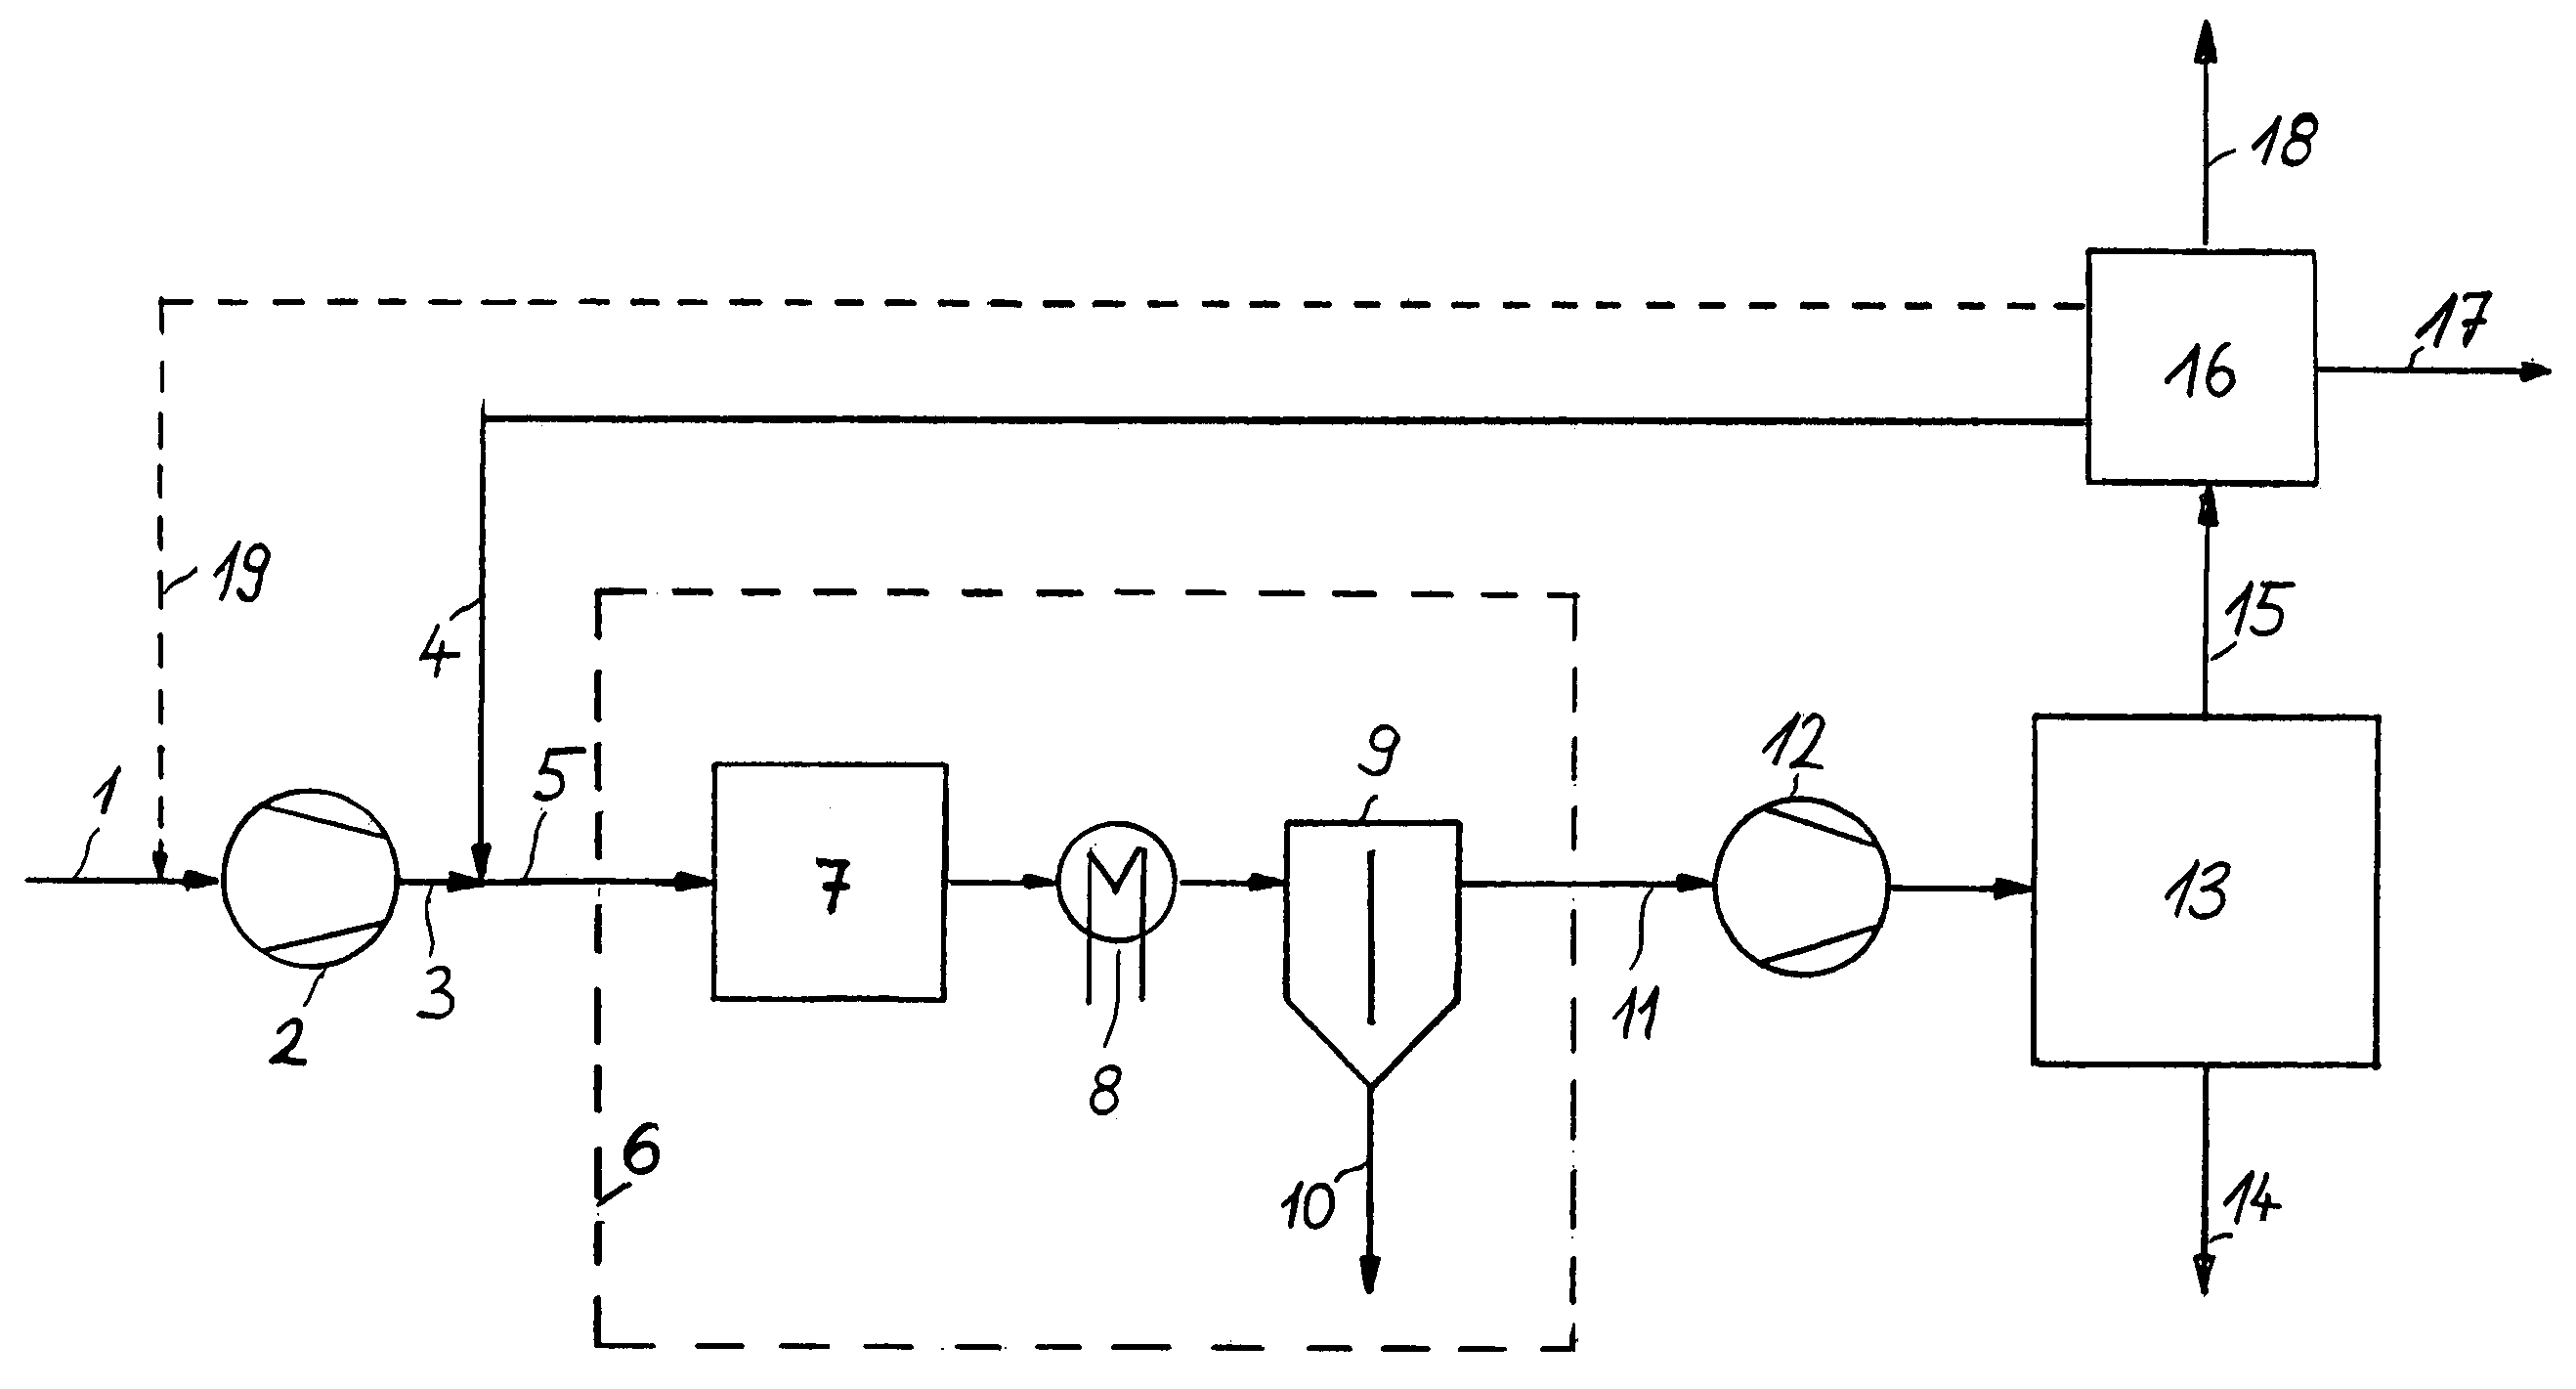 Multiple-pressure process for the production of ammonia